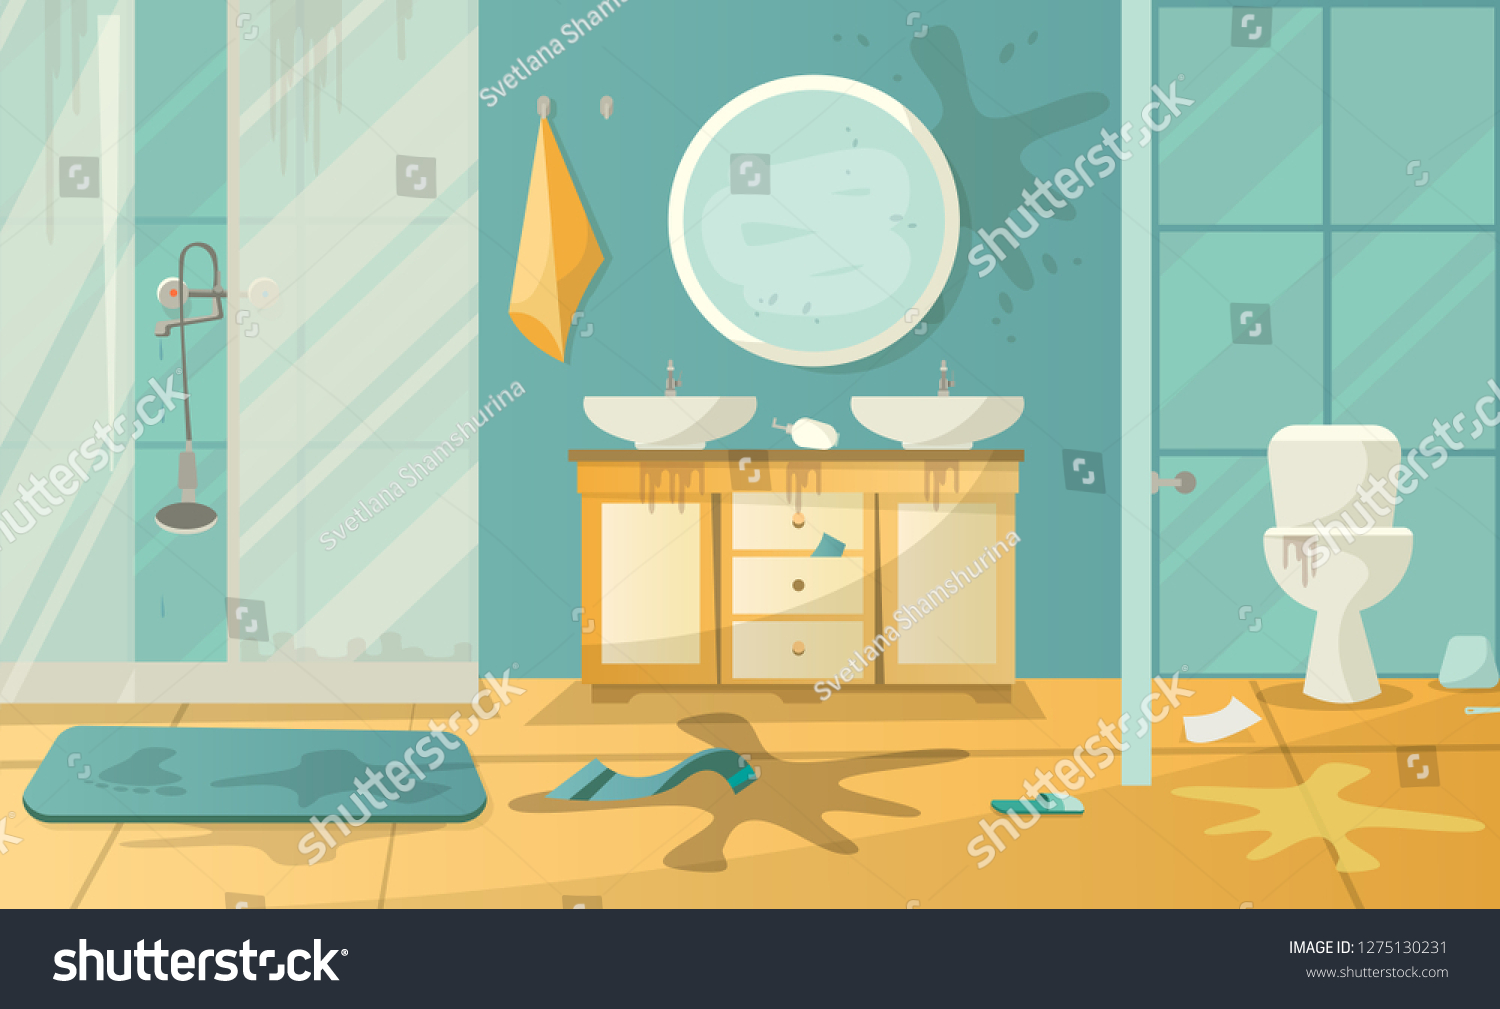 SVG of Dirty interior of bathroom with toilet sink shower cabbin and accessories in a modern style. svg